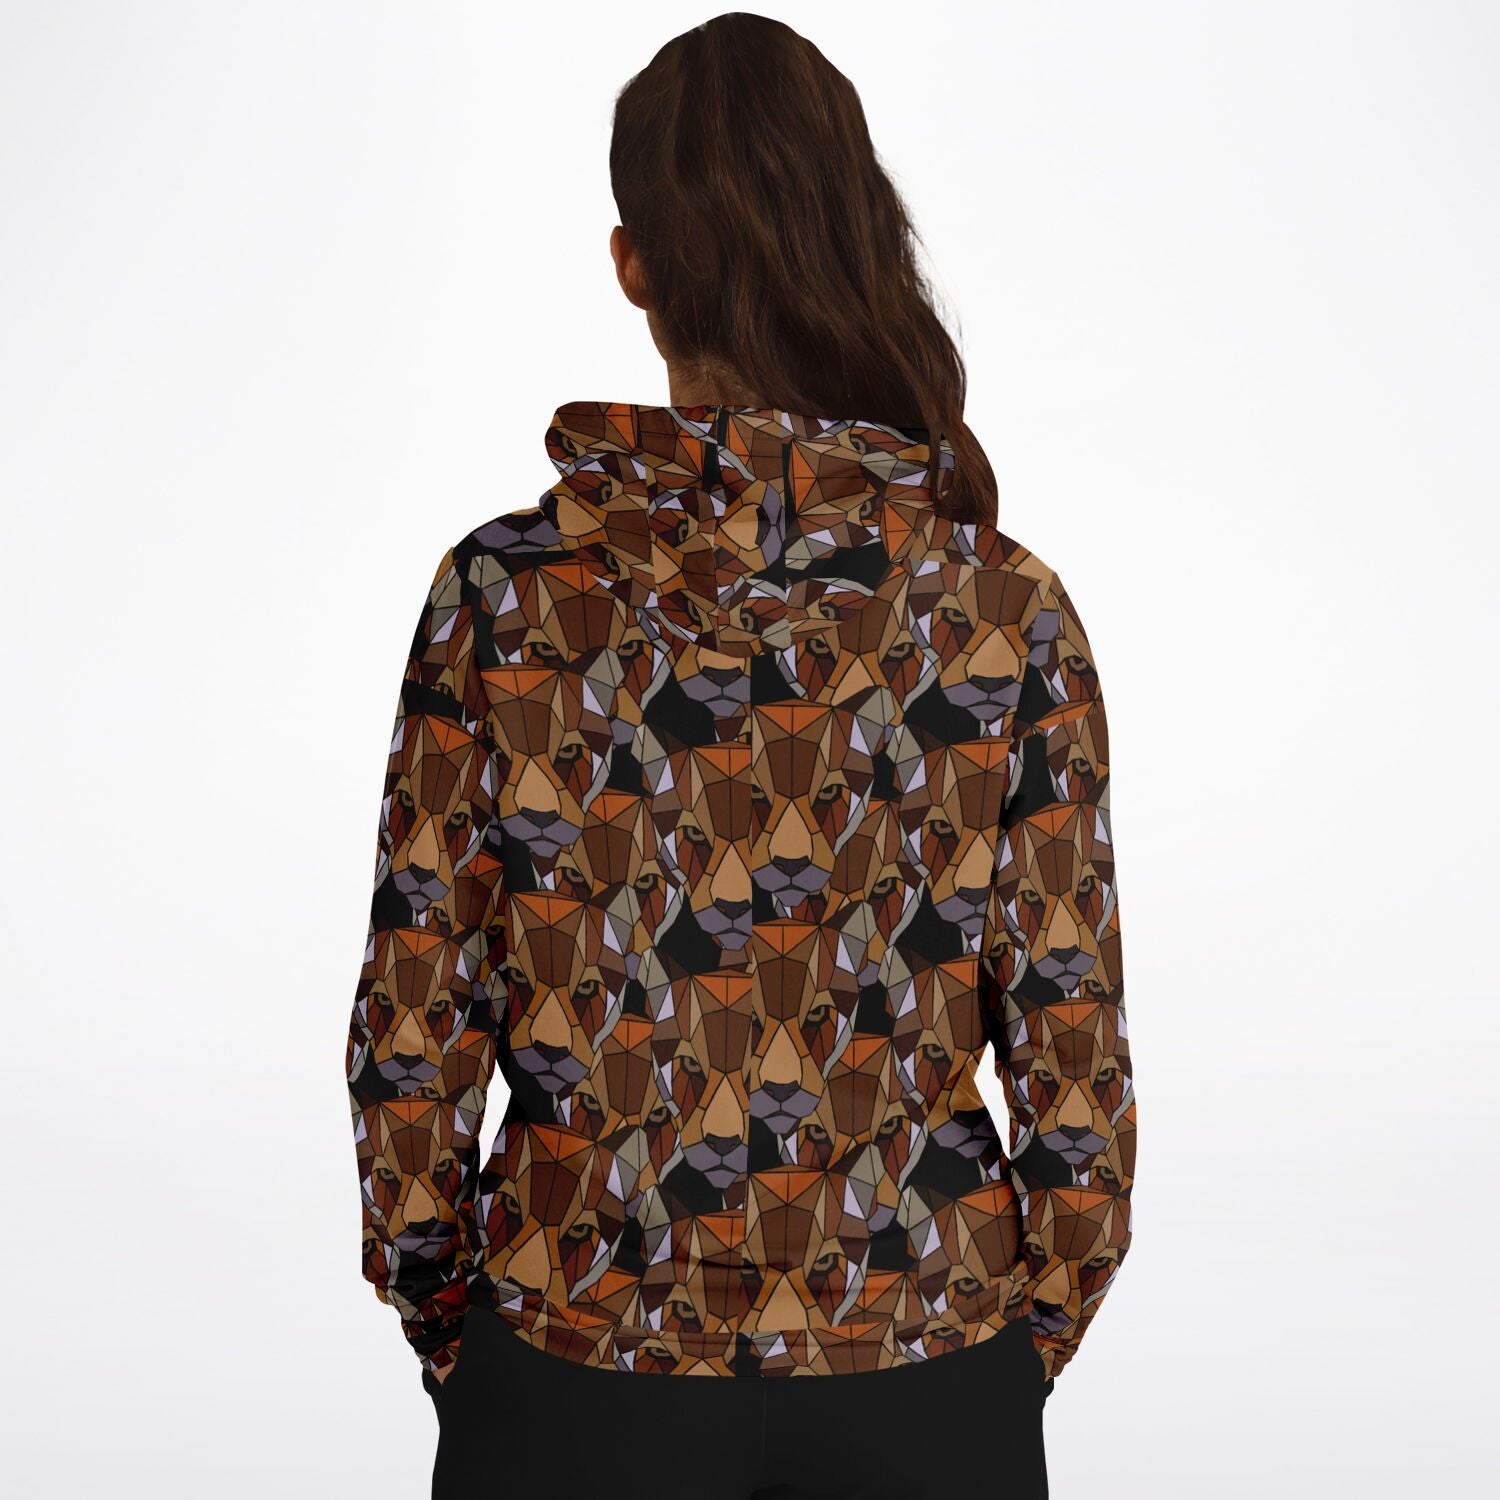 Graphic Panthers Brushed Fleece Hoodie Unisex up to 4 XL